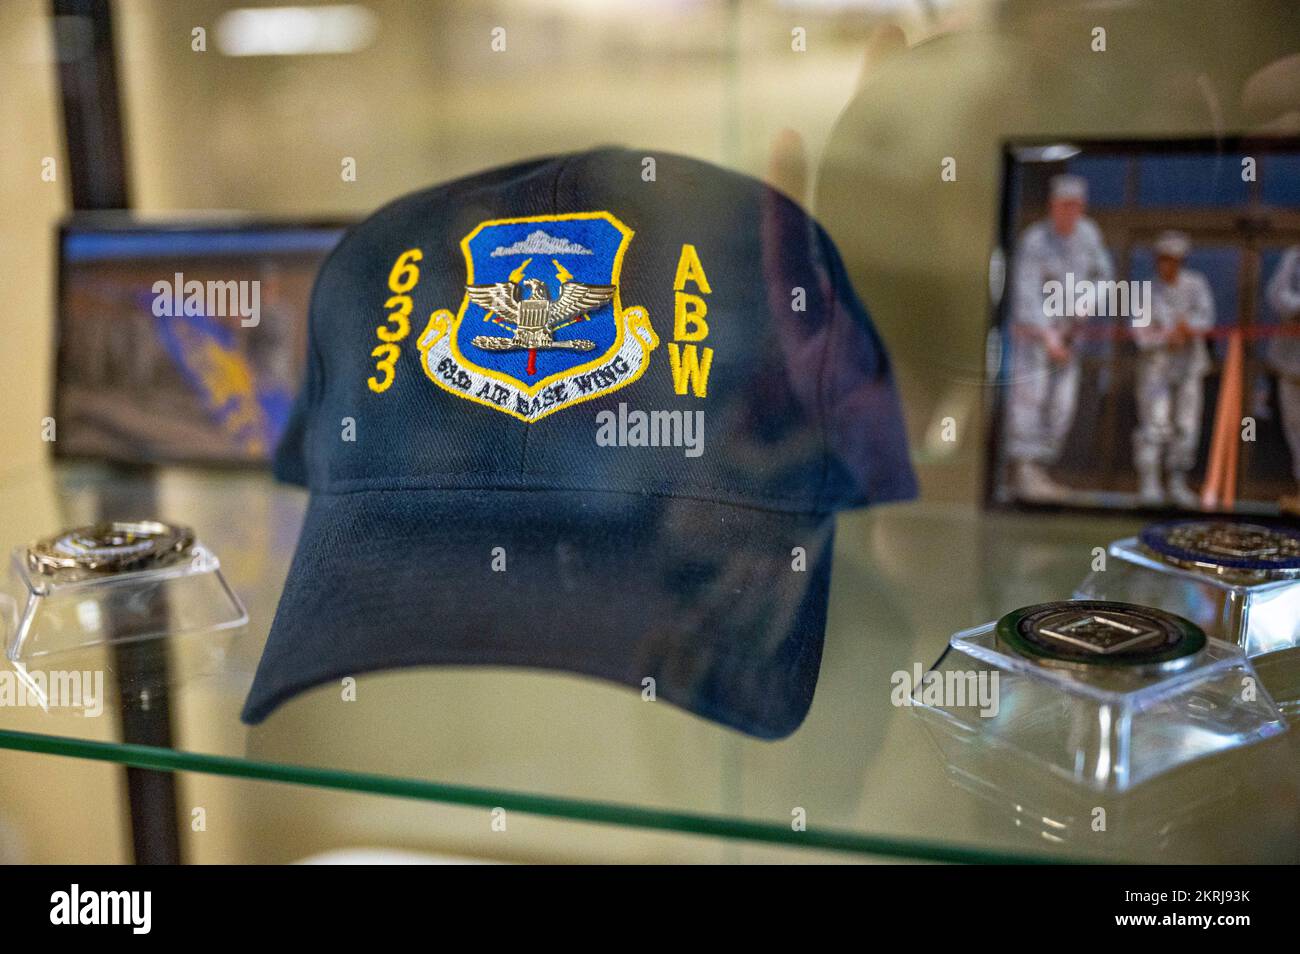 JOINT BASE LANGLEY-EUSTIS, Va. -- J. Kevin Altman, 633d Air Base Wing executive director, donated this hat to be put on display at the 633d Air Base Wing Heritage Hall at Joint Base Langley-Eustis, Virginia, Nov. 18, 2022. The 633d ABW can be traced back to Pleiku Air Base in the central highlands of Vietnam, where Airmen with the 633d Combat Support Group offered medical and infrastructure aid when establishing a relationship with the local Montagnard people, who gifted crossbows as a token of appreciation, creating the Crossbow Nation. Stock Photo